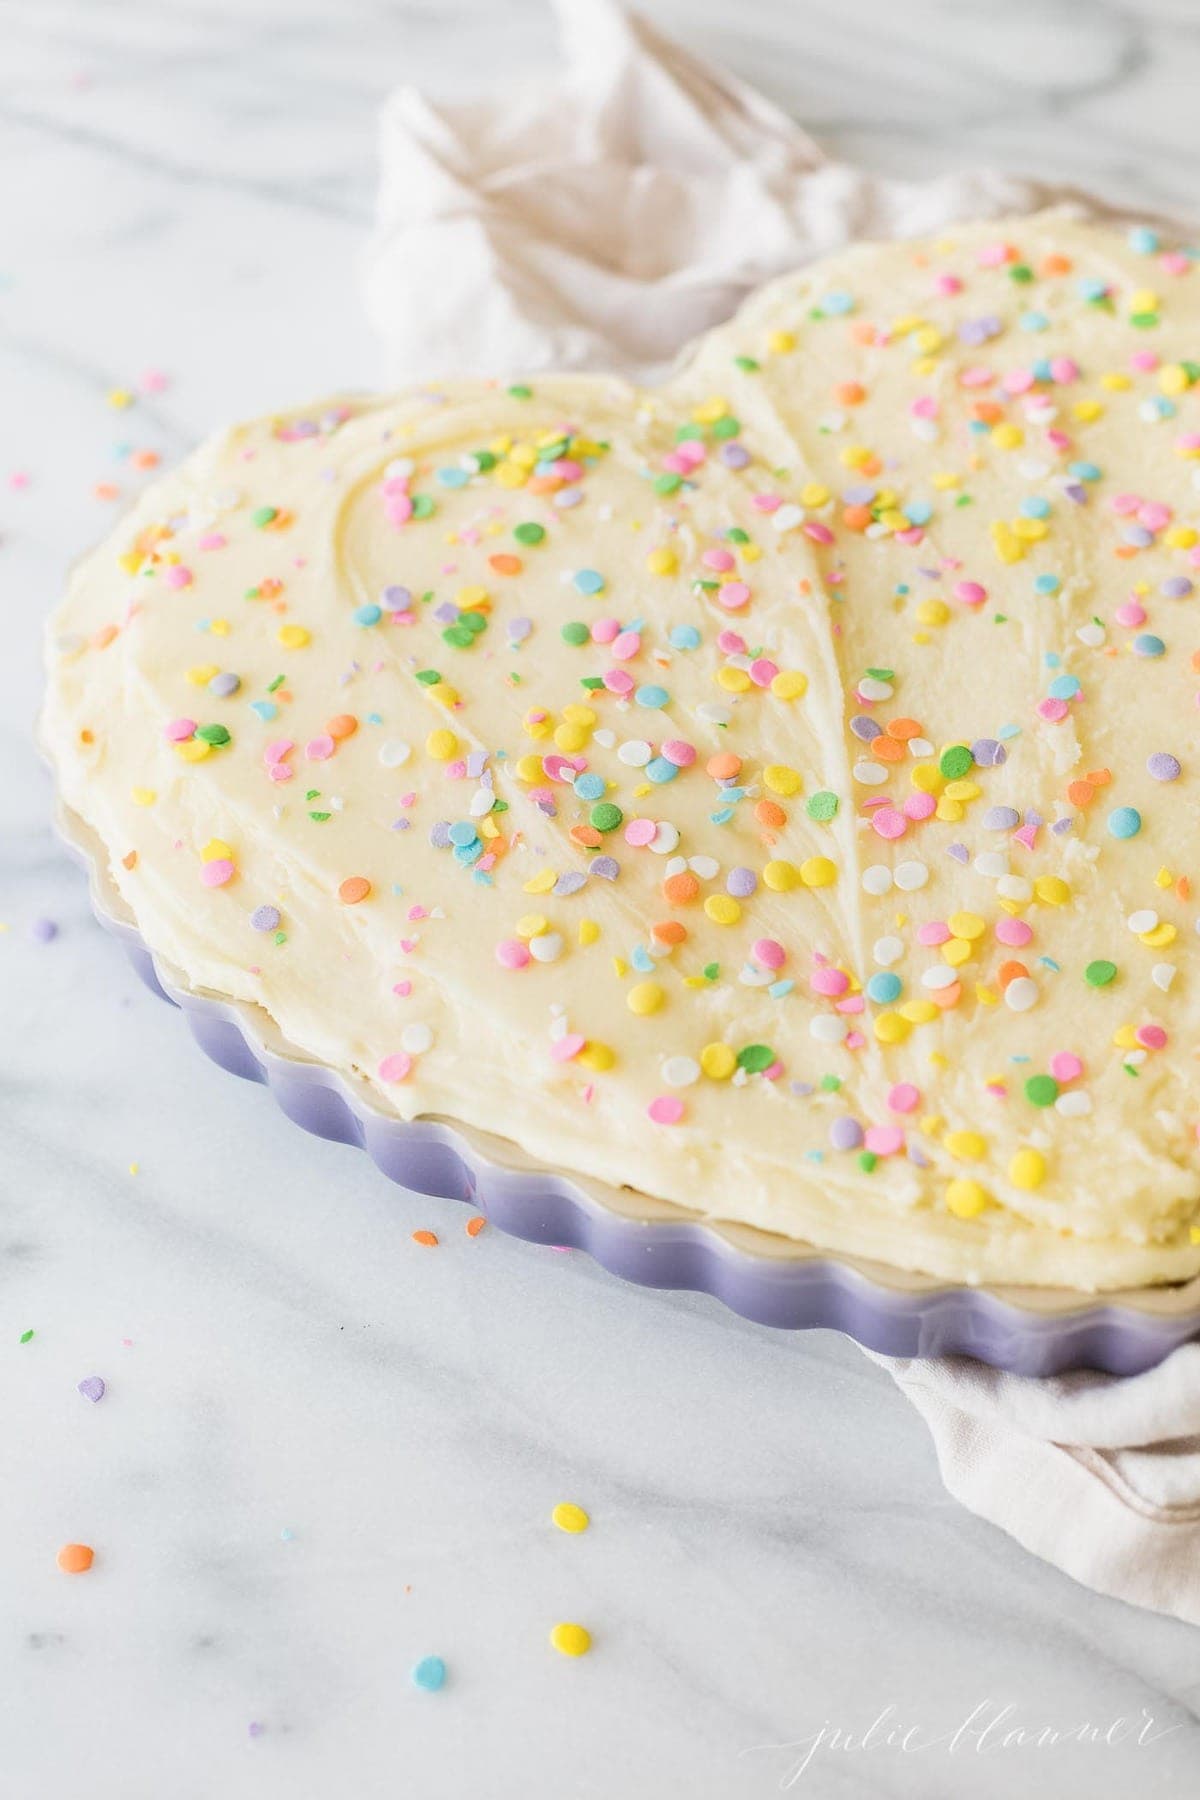 A frosted sugar cookie cake in a heart shaped pan